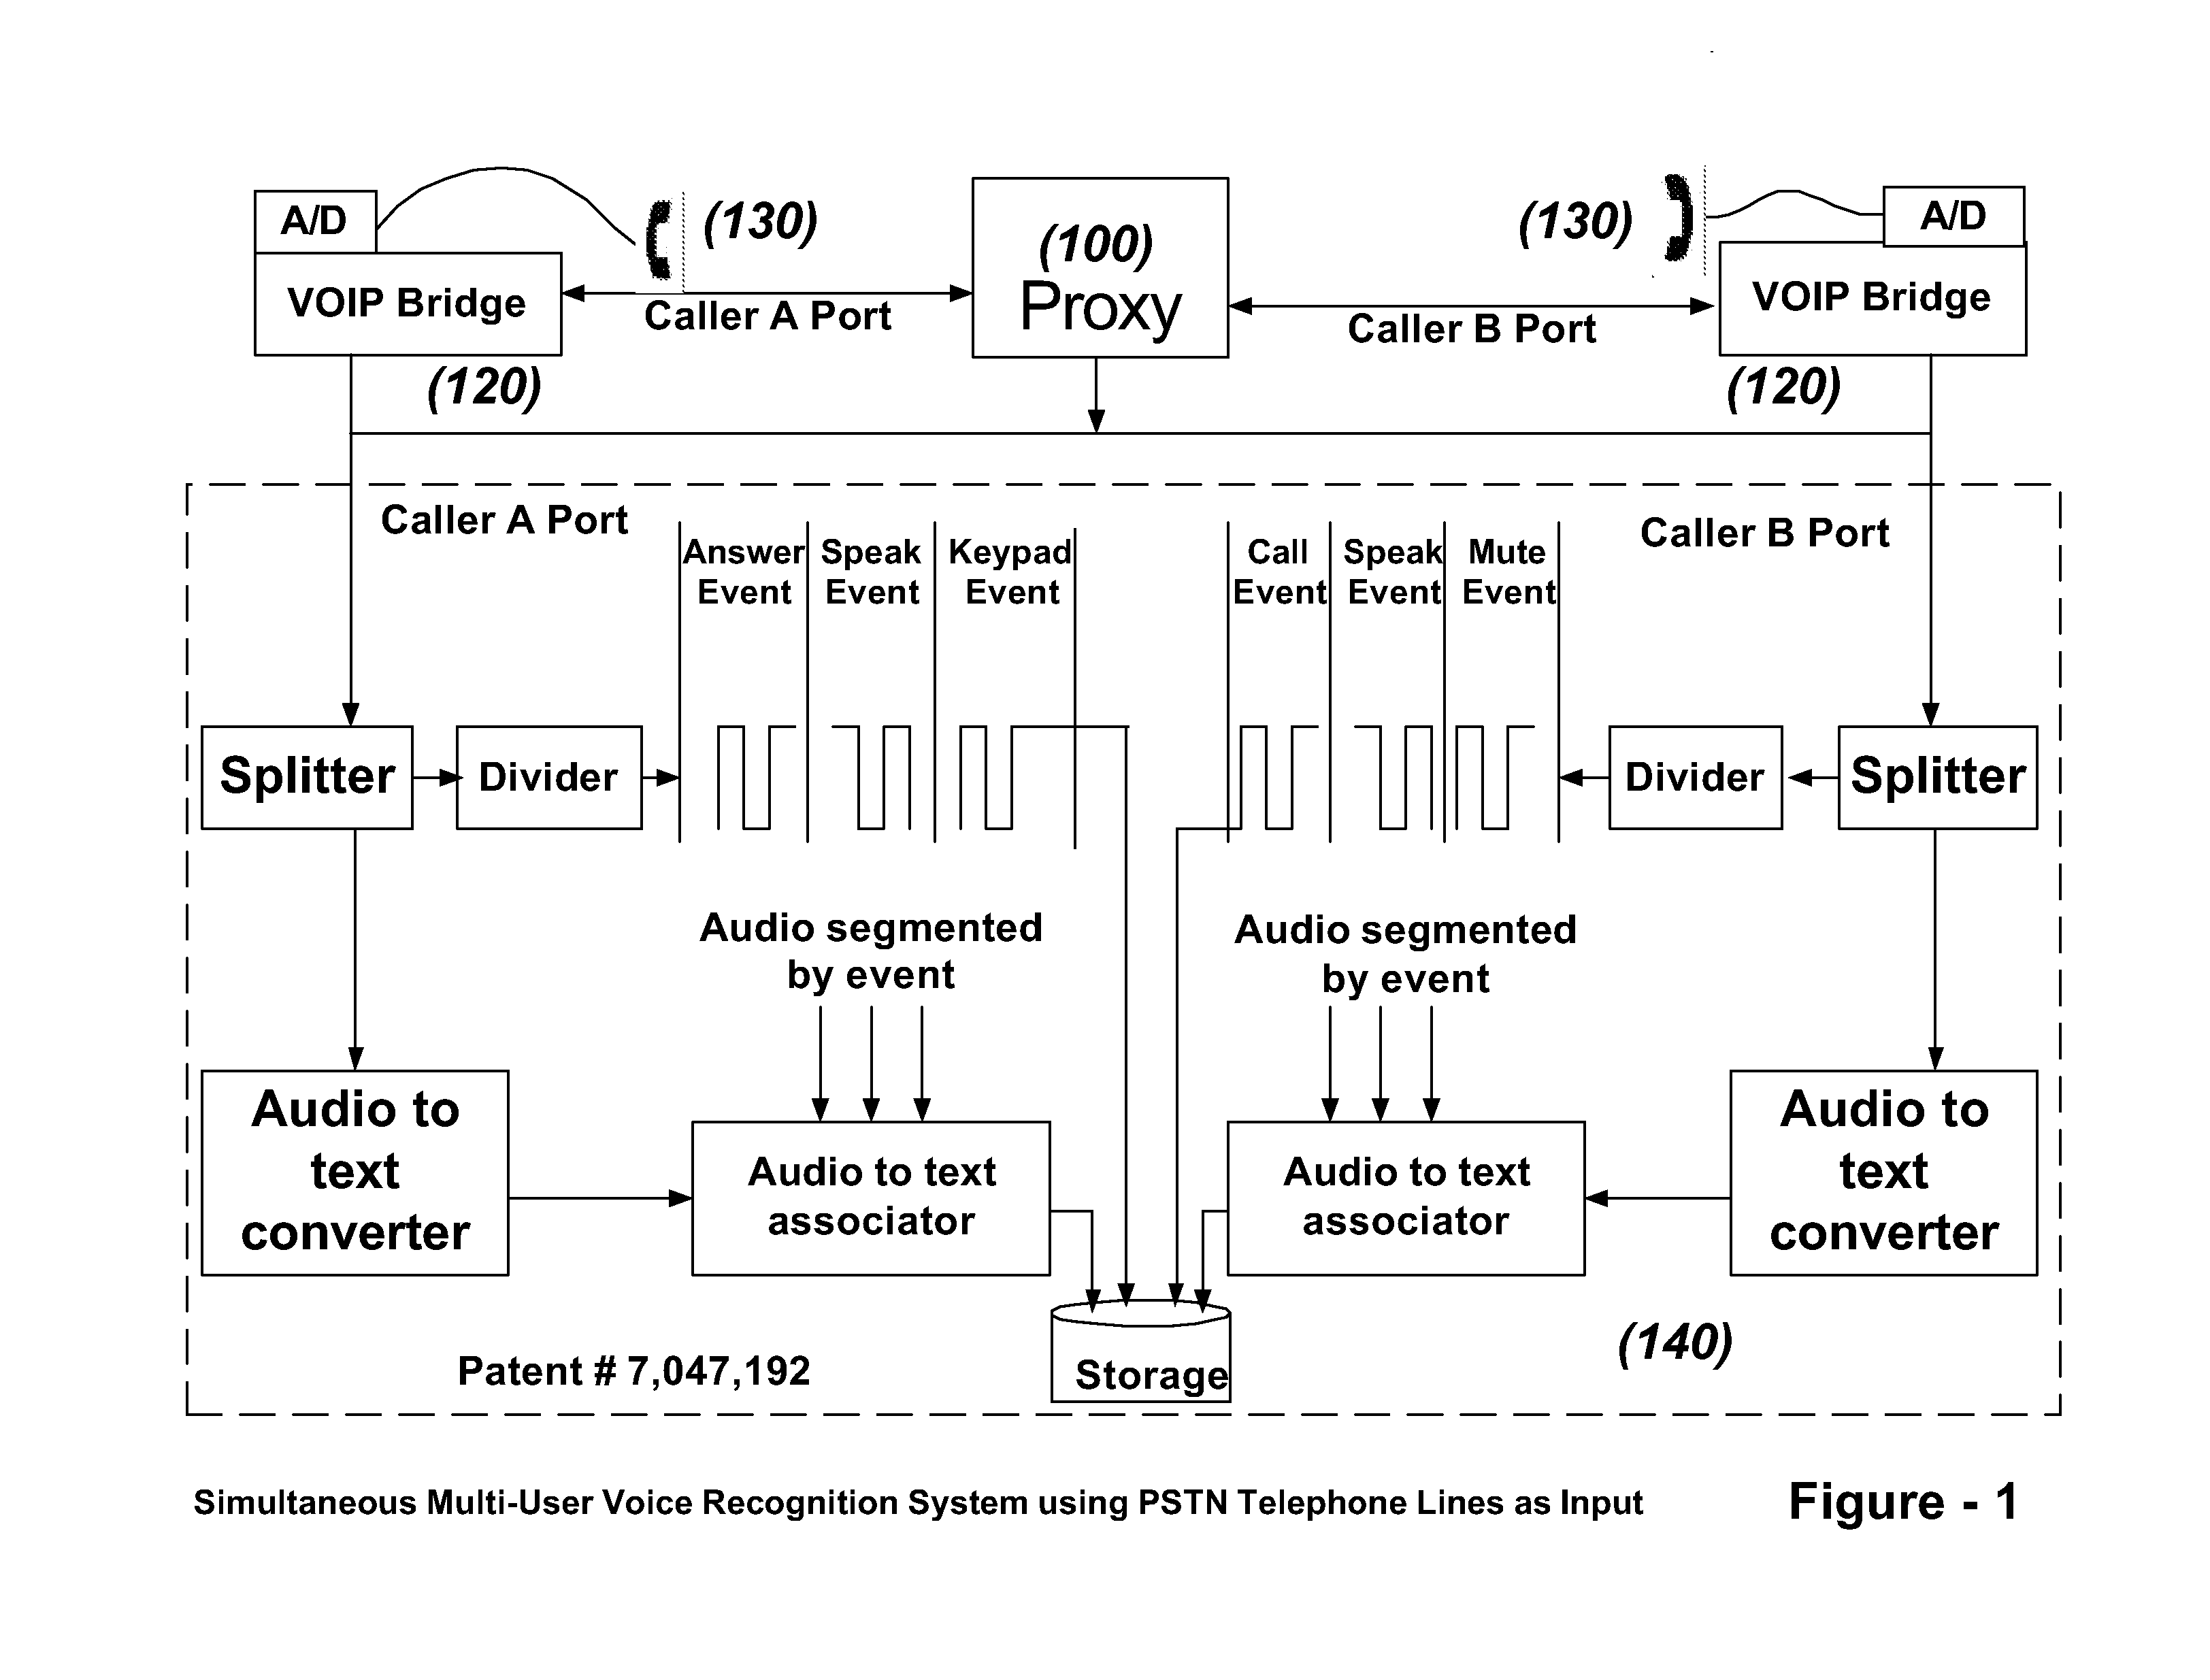 Enhancement of simultaneous multi-user real-time speech recognition system